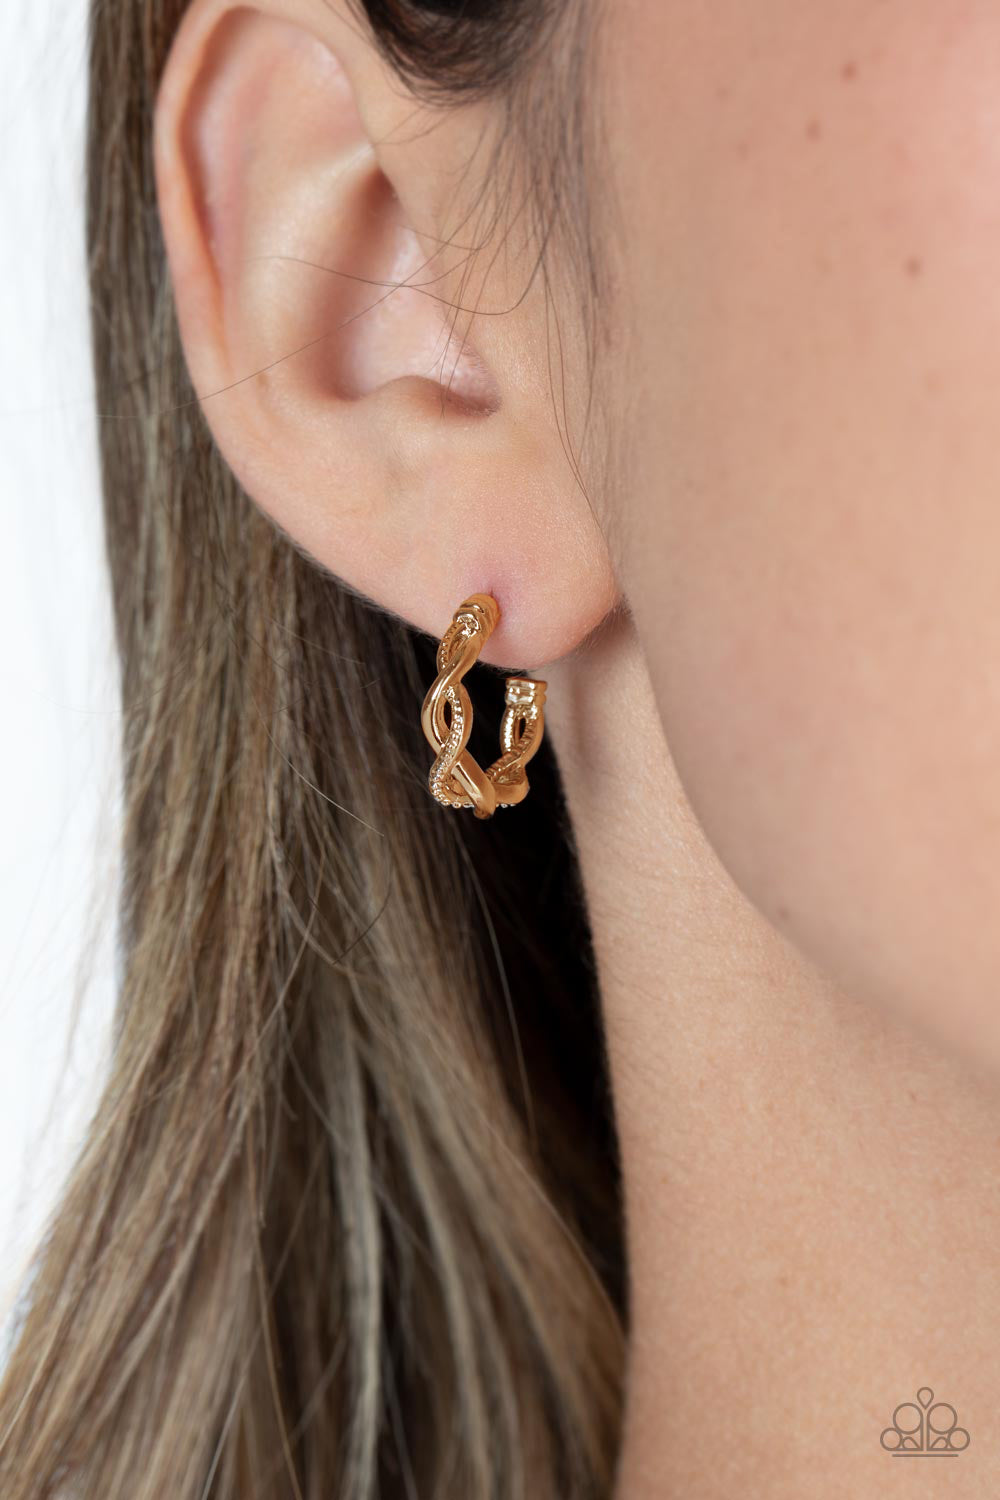 Paparazzi Accessories Infinite Incandescence - Gold Shiny gold and studded gold curve around one another in an infinity-like pattern. The contrasting sheen of the gold curves around the ear for an incandescent hoop. Earring attaches to a standard post fit